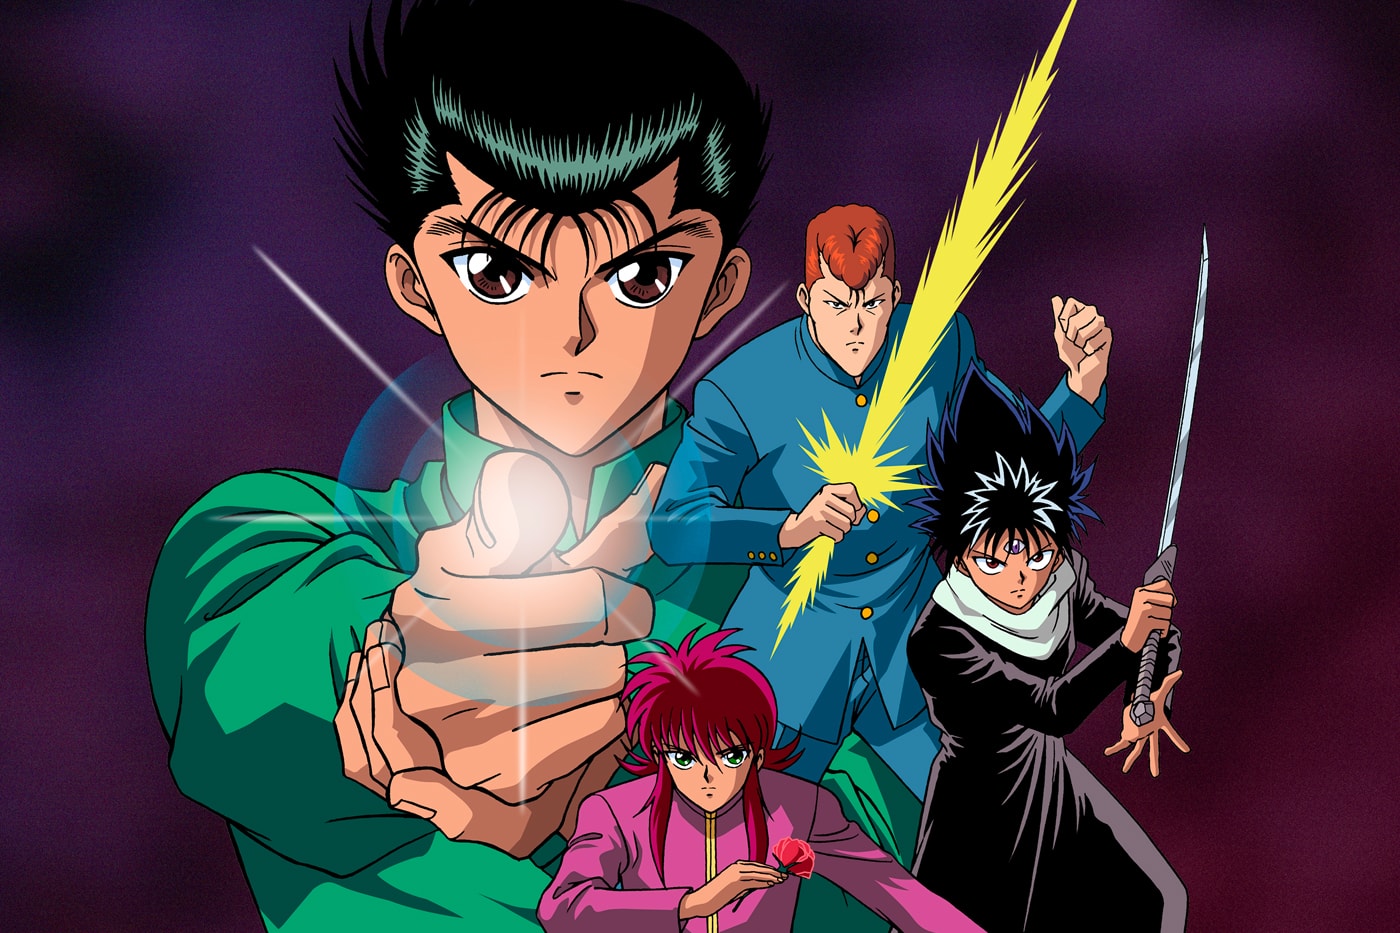 Netflix Yū Yū Hakusho Live-Action Series Announcement Info Adaptation Release Date Premiere First Look Character Photos Images Yoshihiro Togashi 